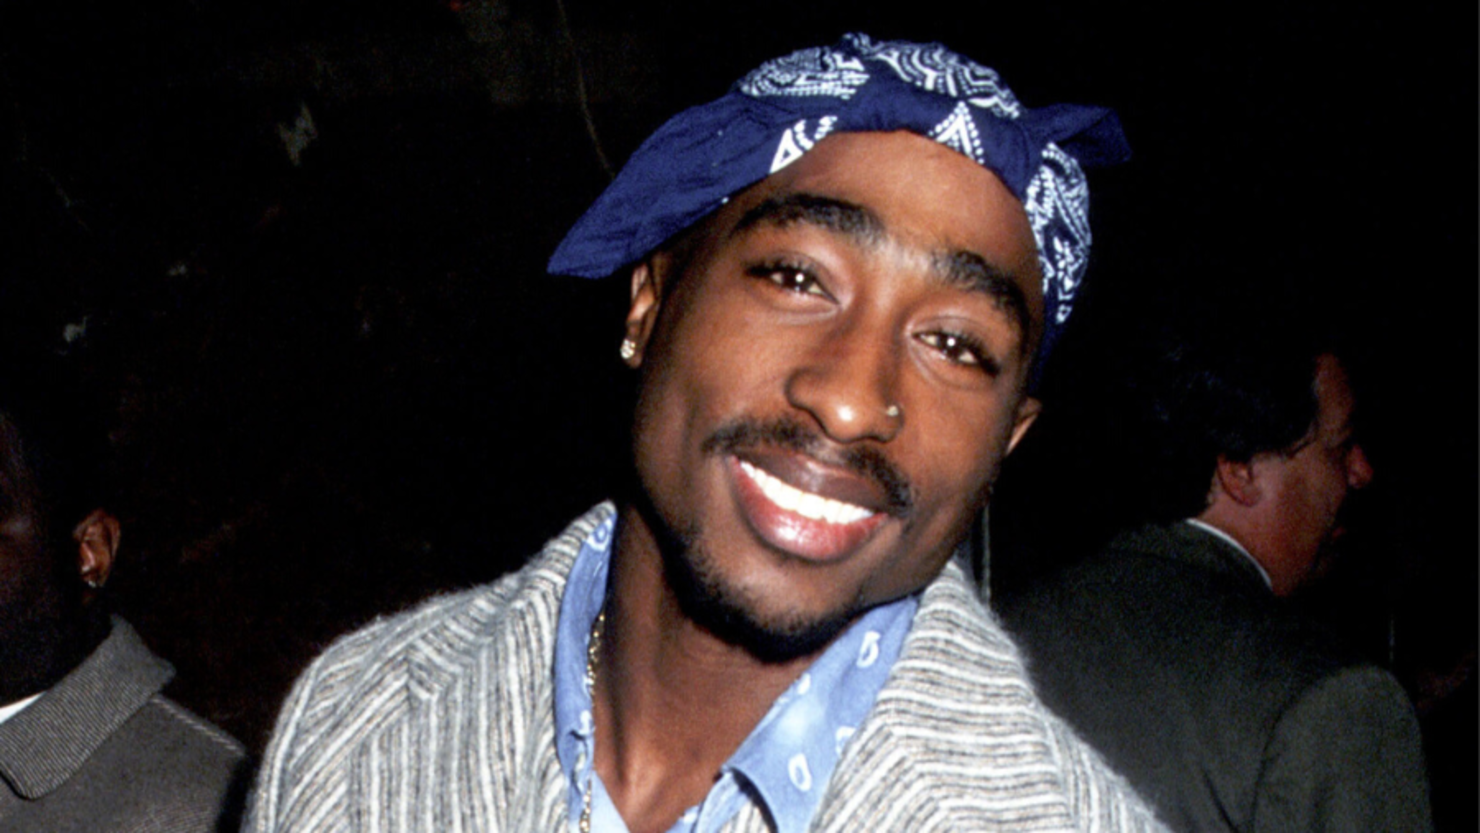 Today in Hip-Hop History: Tupac Shakur Released 'Strictly For My